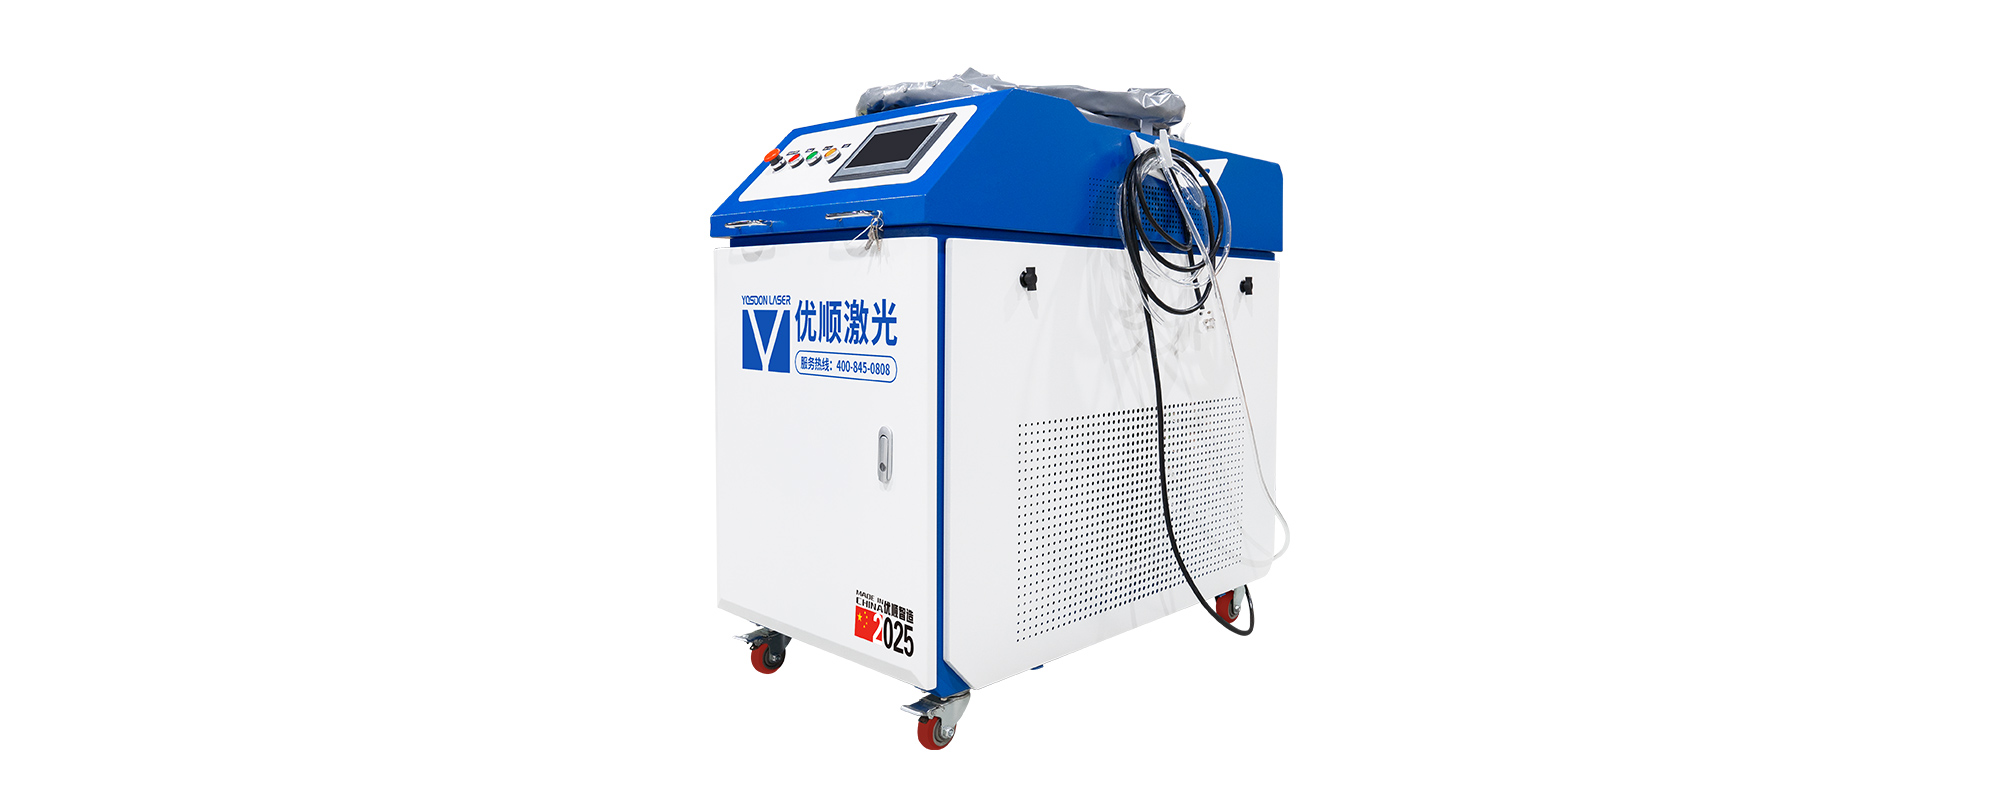 YSW Portable Series SUP20T 3-in-1 System Handheld Welding Machine Manual 